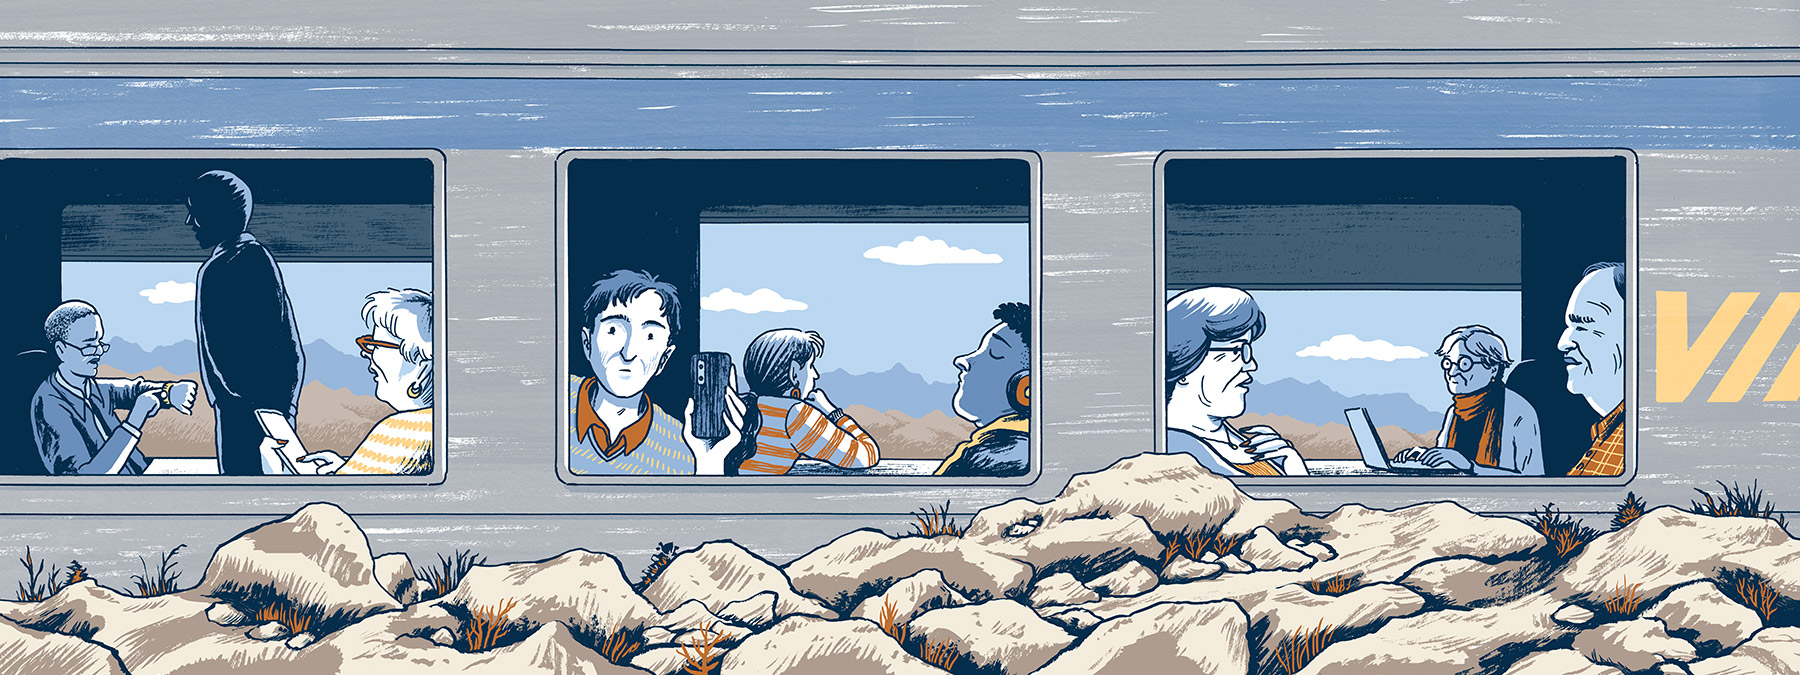 Wide illustration of a grey train with a blue stripe across the side. Outside are rocks and mountains in the distance. Through the windows, various passengers are seen looking outside, sleeping, working on a laptop, and complaining to a porter while pointing to a watch, implying the train is late.